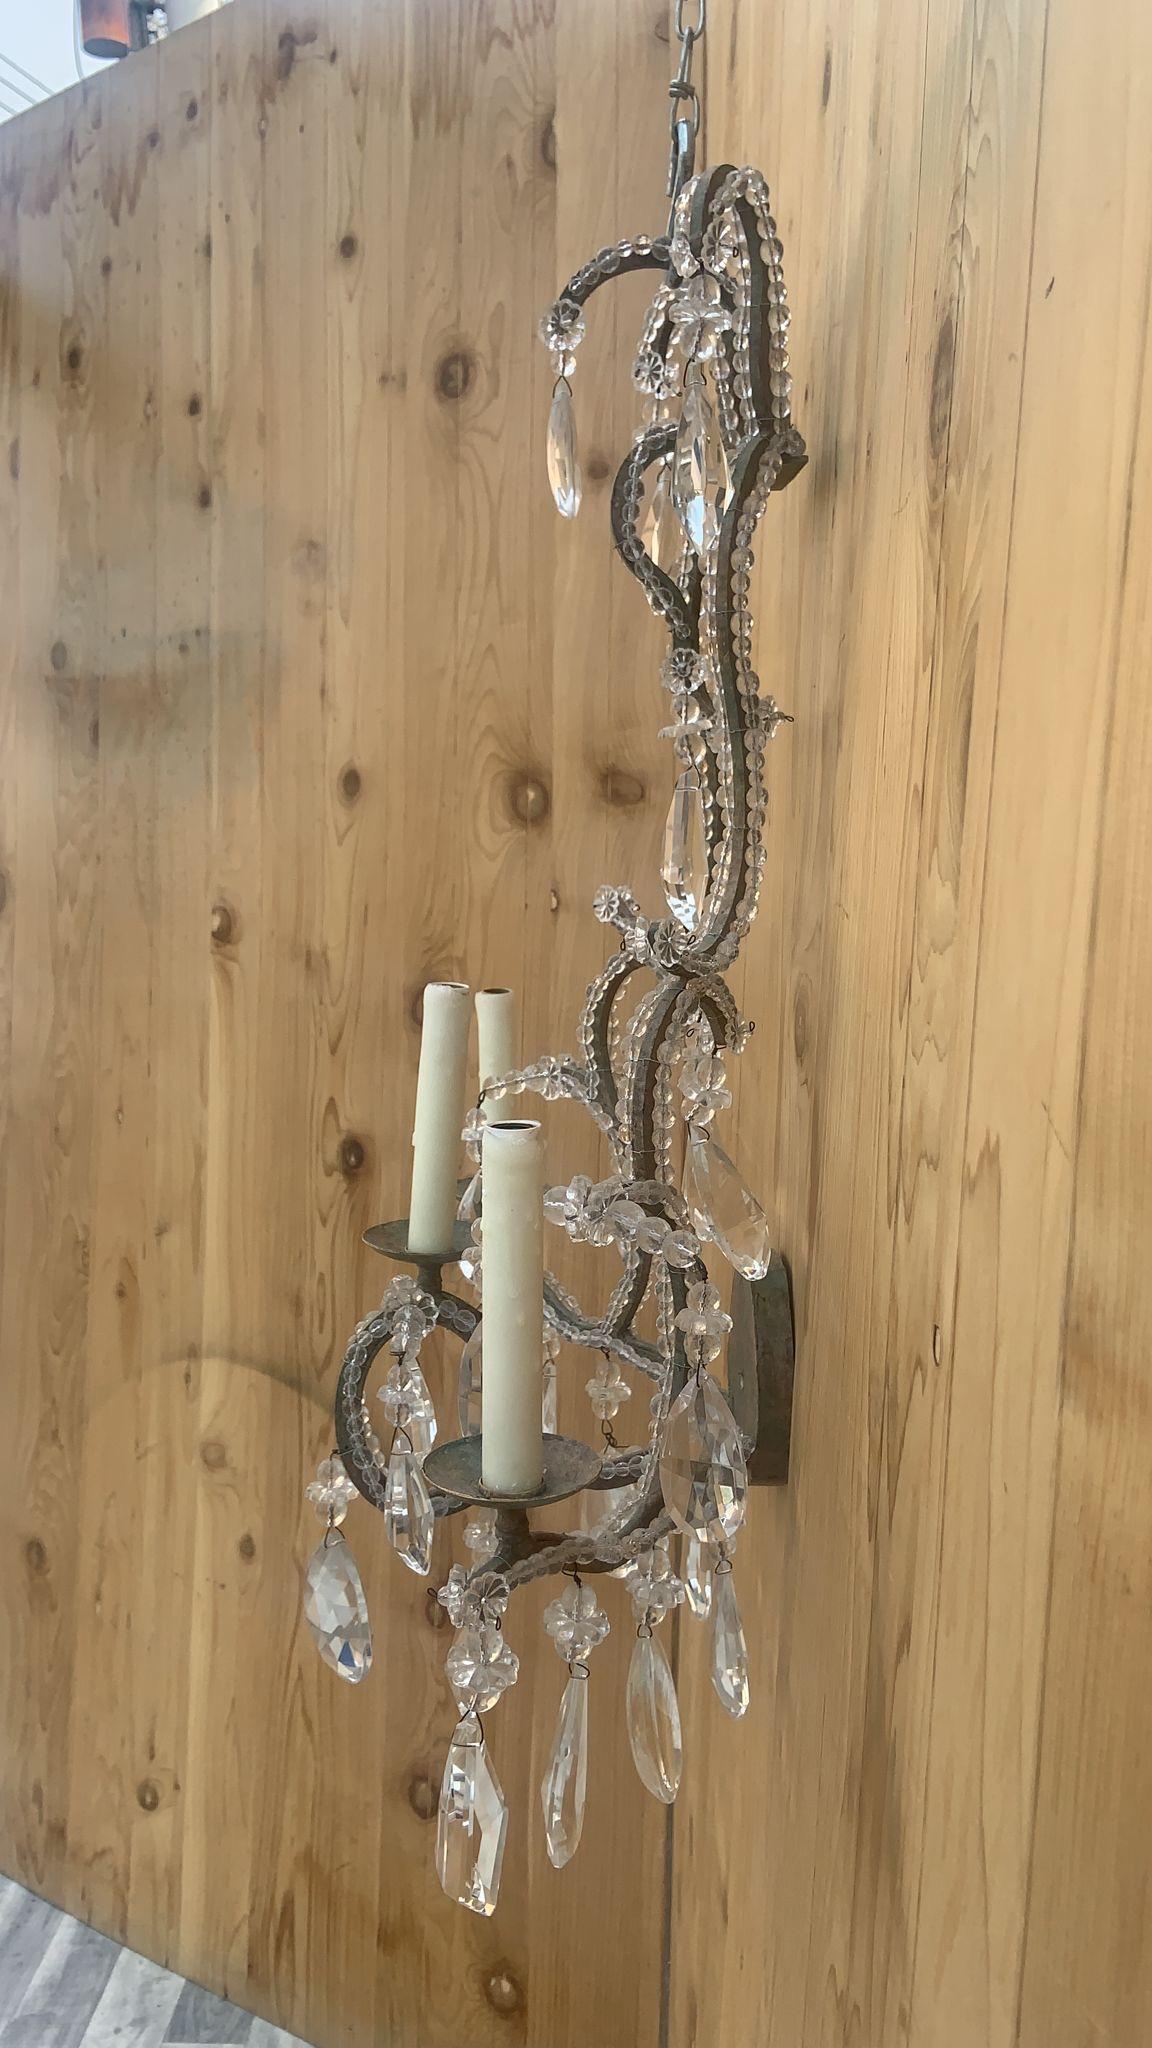 Vintage Dennis & Leen French Louis XIV Styled Large Iron & Crystal Beaded 3 Light Wall Sconces - Pair 

Striking pair of vintage Dennis & Leen French Louis XVI Styled Iron & Crystal Wall Sconces will be an amazing addition to Hollywood Regency or